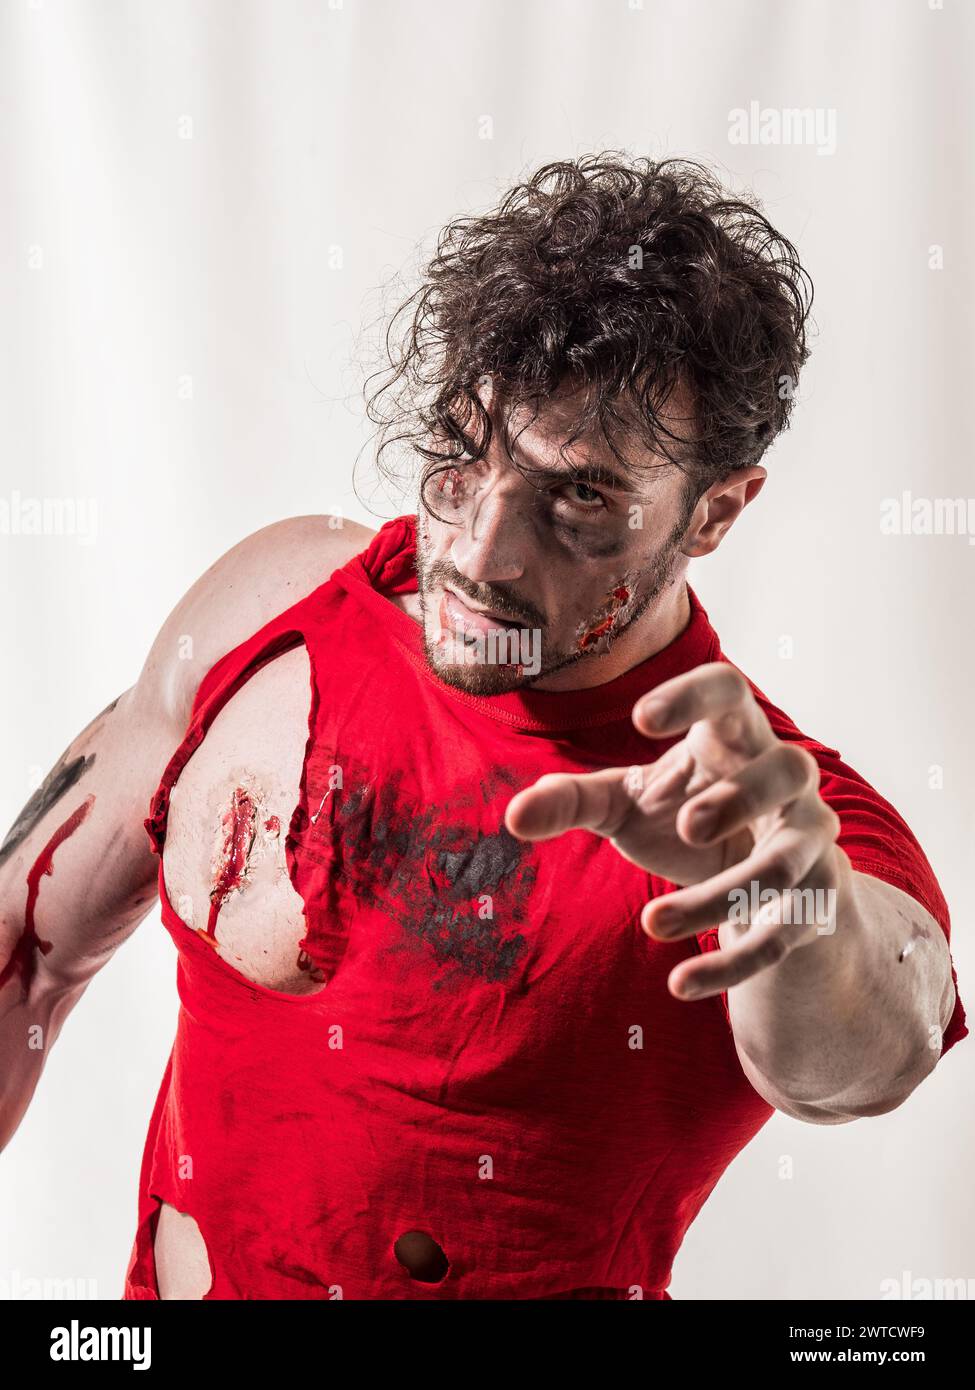 A zombie man wearing a red shirt is shown with blood splattered all over his body. The image captures a scene of violence or injury, showcasing the af Stock Photo